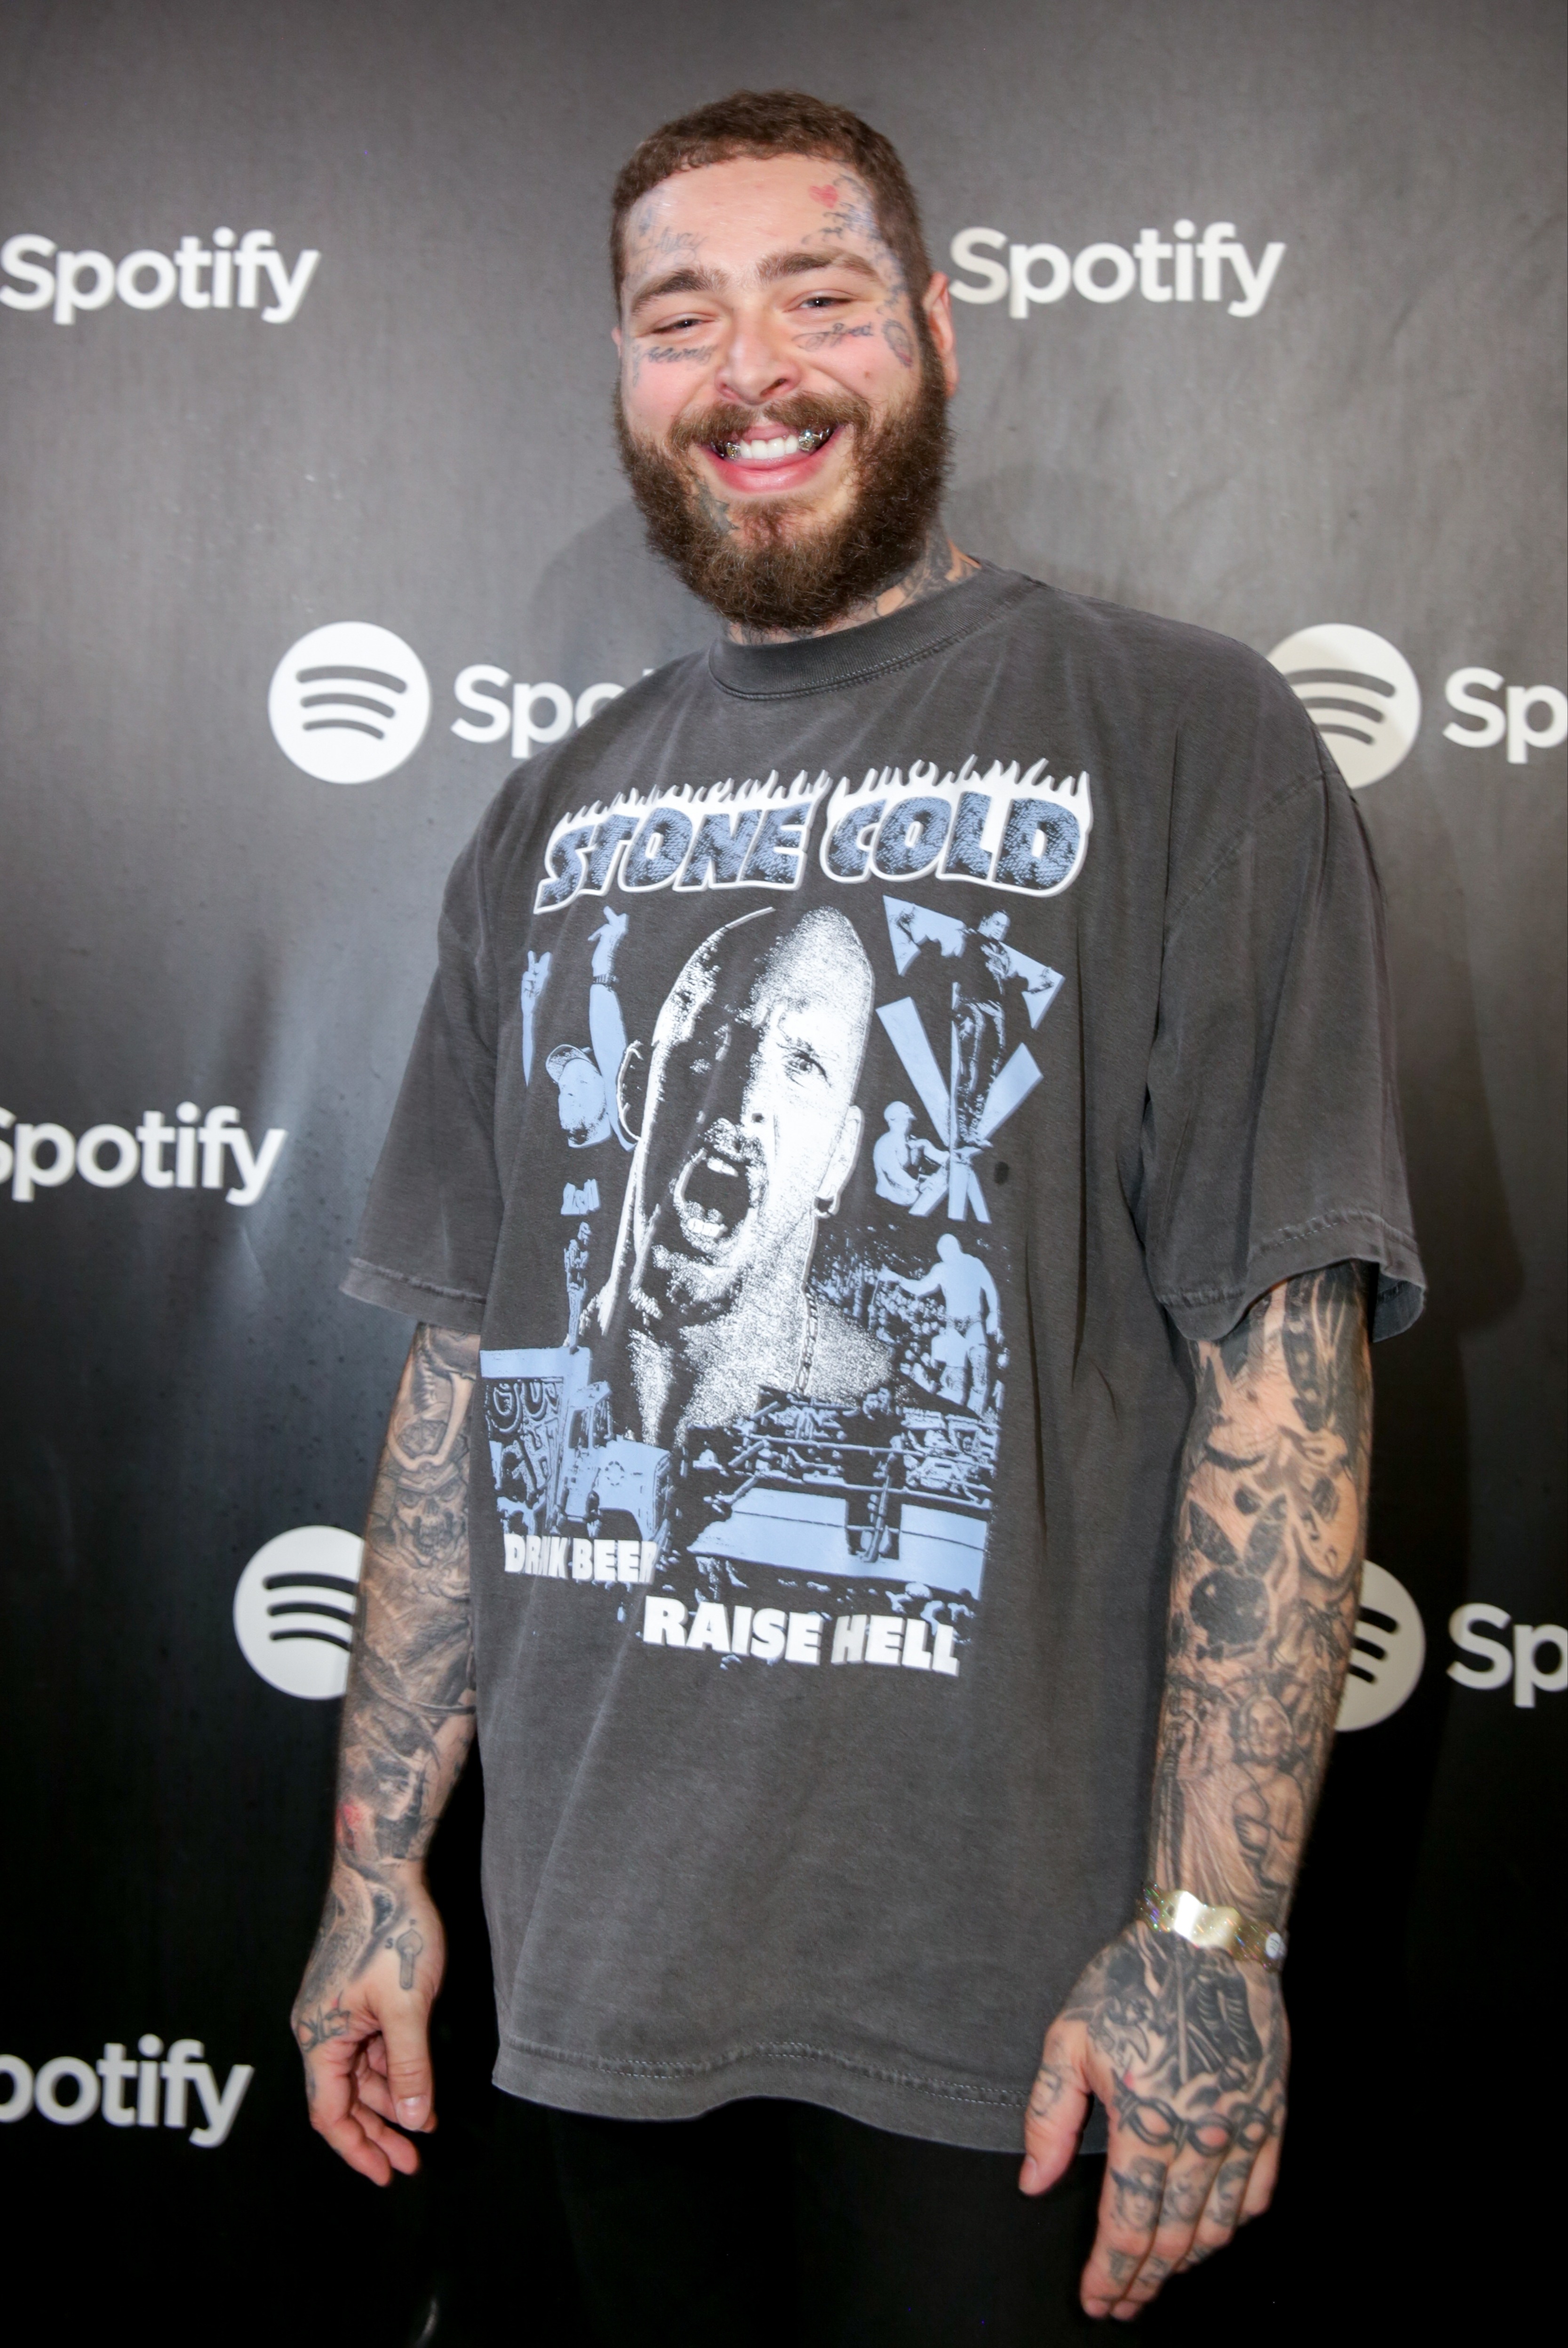 Post Malone reached his heaviest weight of 240 pounds before deciding that a change was needed